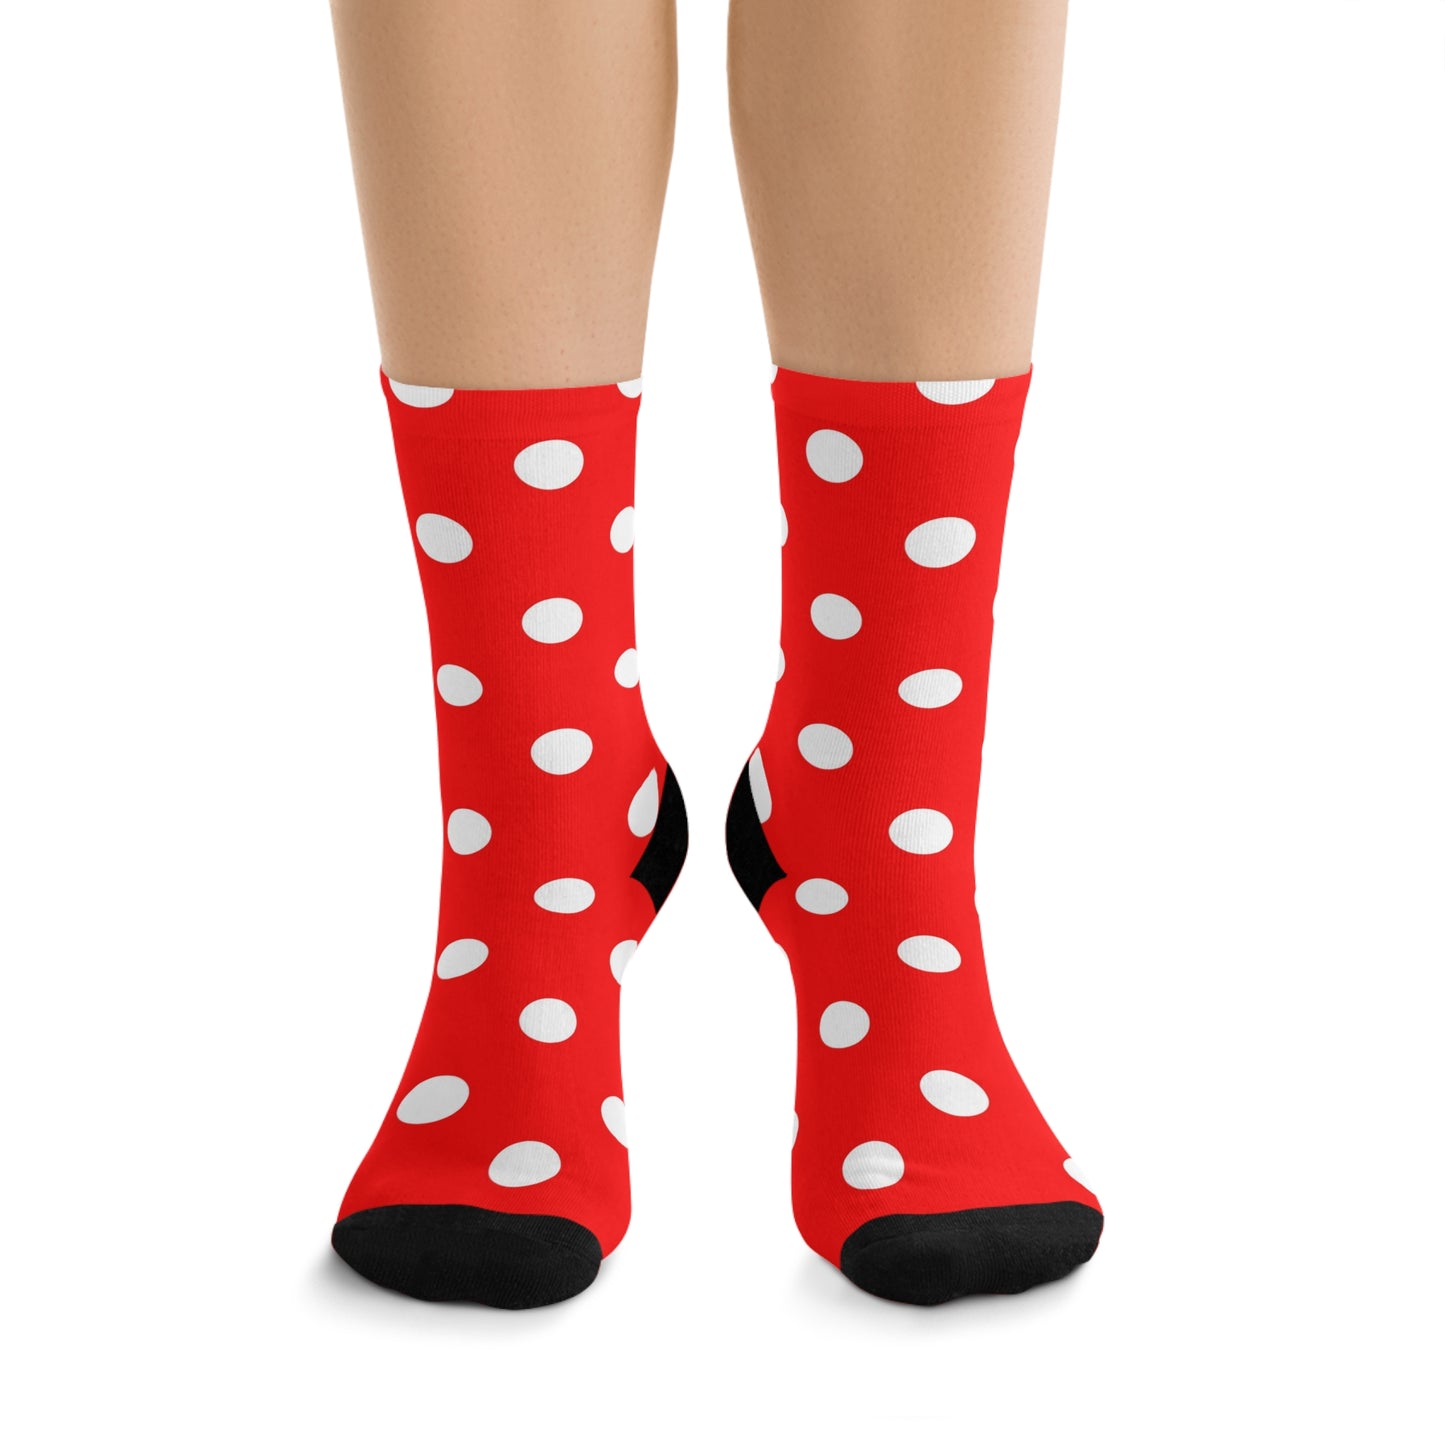 Red With White Polka Dots Socks